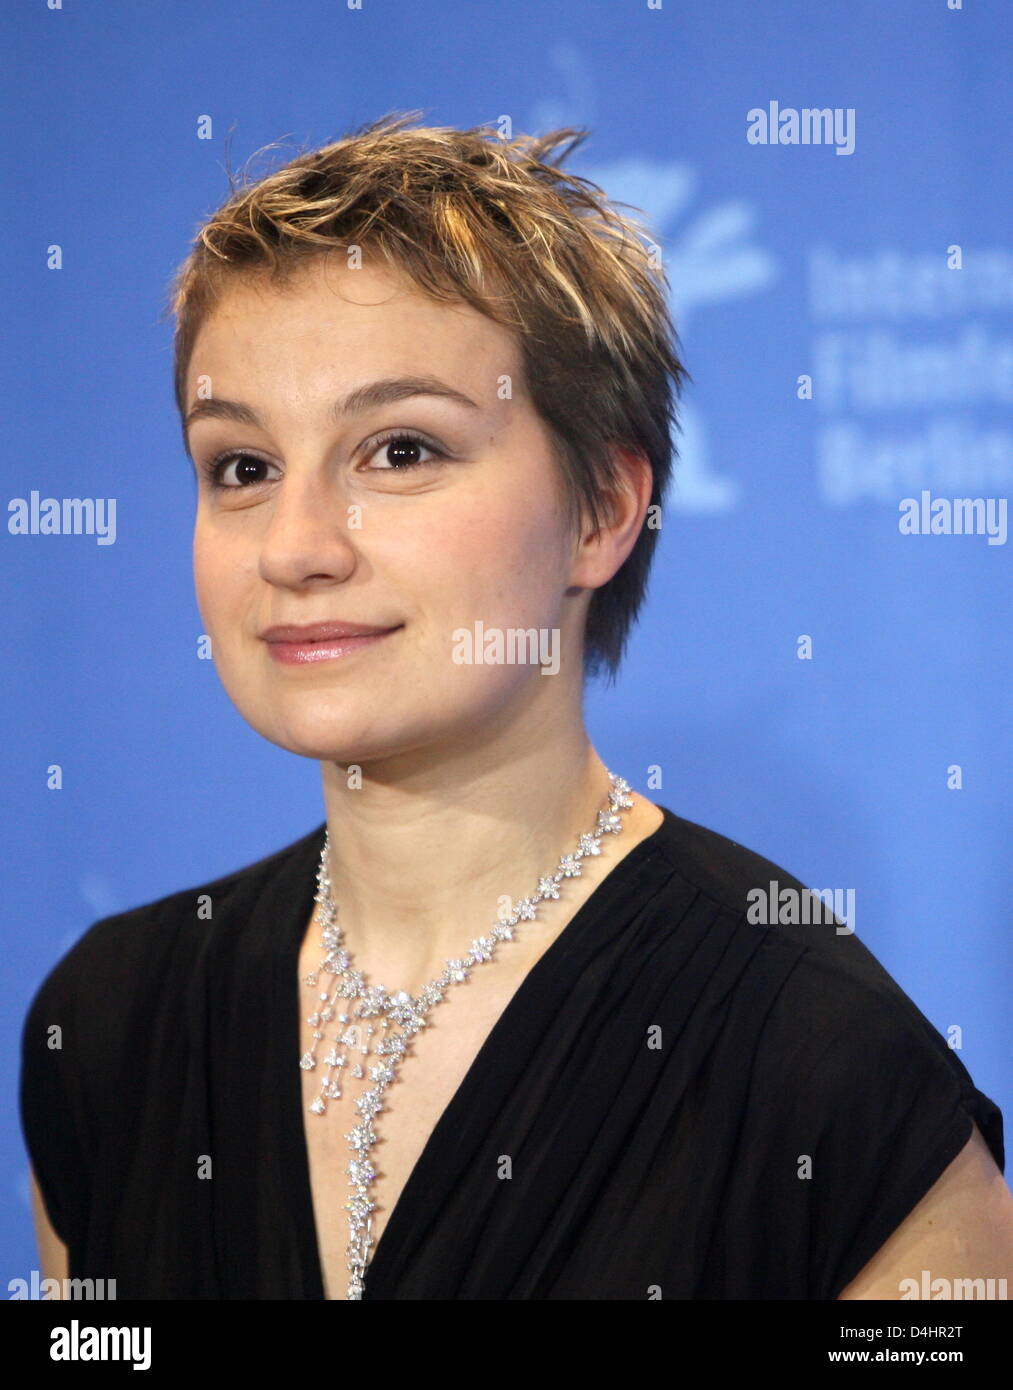 Romanian actress Anamaria Marinca poses at the photocall for her film ?Storm? at the 59th Berlin International Film Festival in Berlin, Germany, 07 February 2009. The film is one of 18 films to compete for the Silver and Golden Bears of the 59th Berlinale. Photo: ALINA NOVOPASHINA Stock Photo